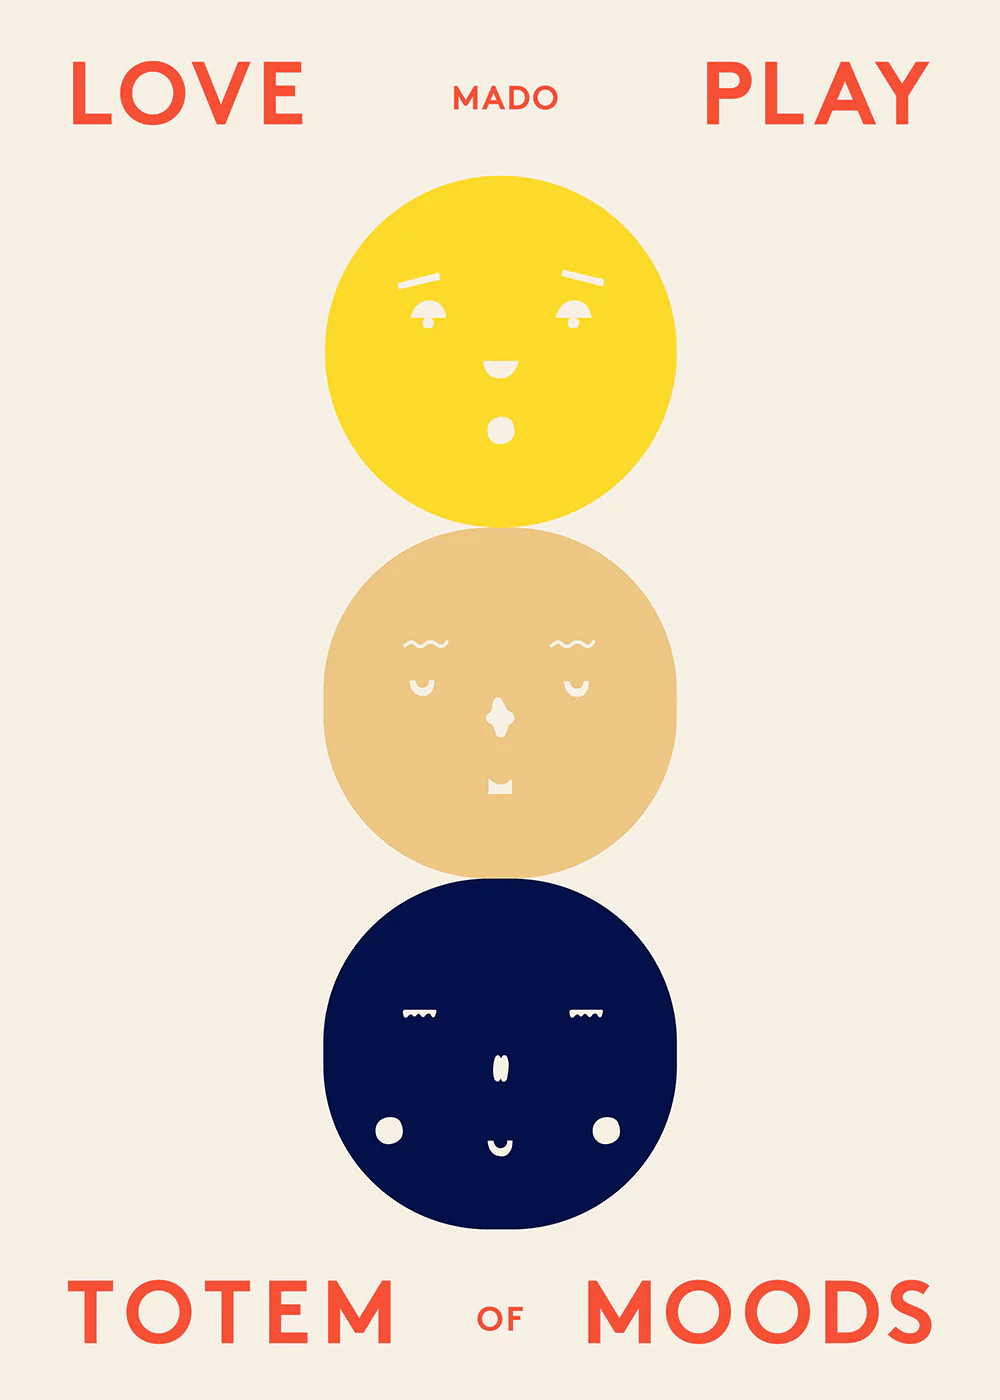 Totem of moods